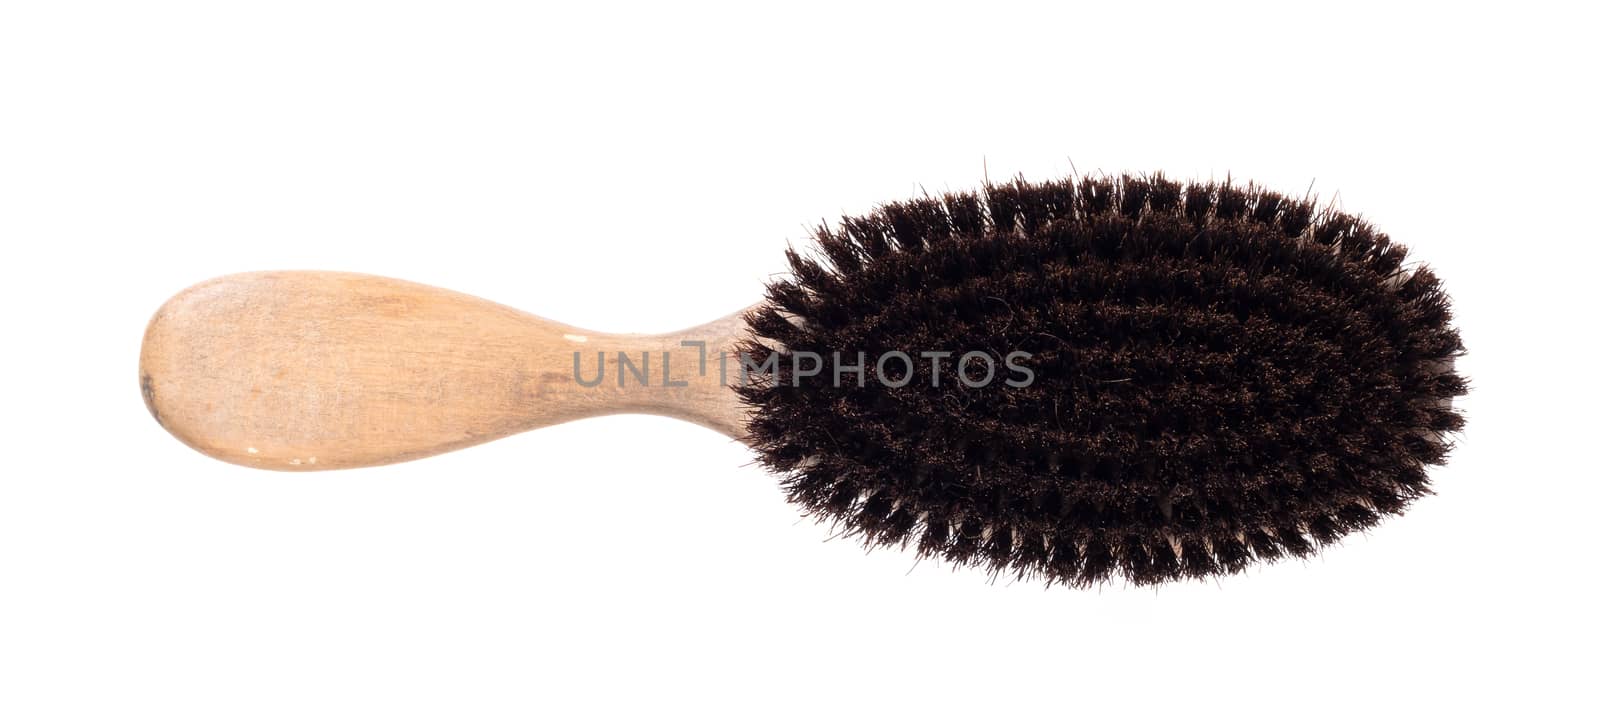 Old hair brush with some hair in it by michaklootwijk